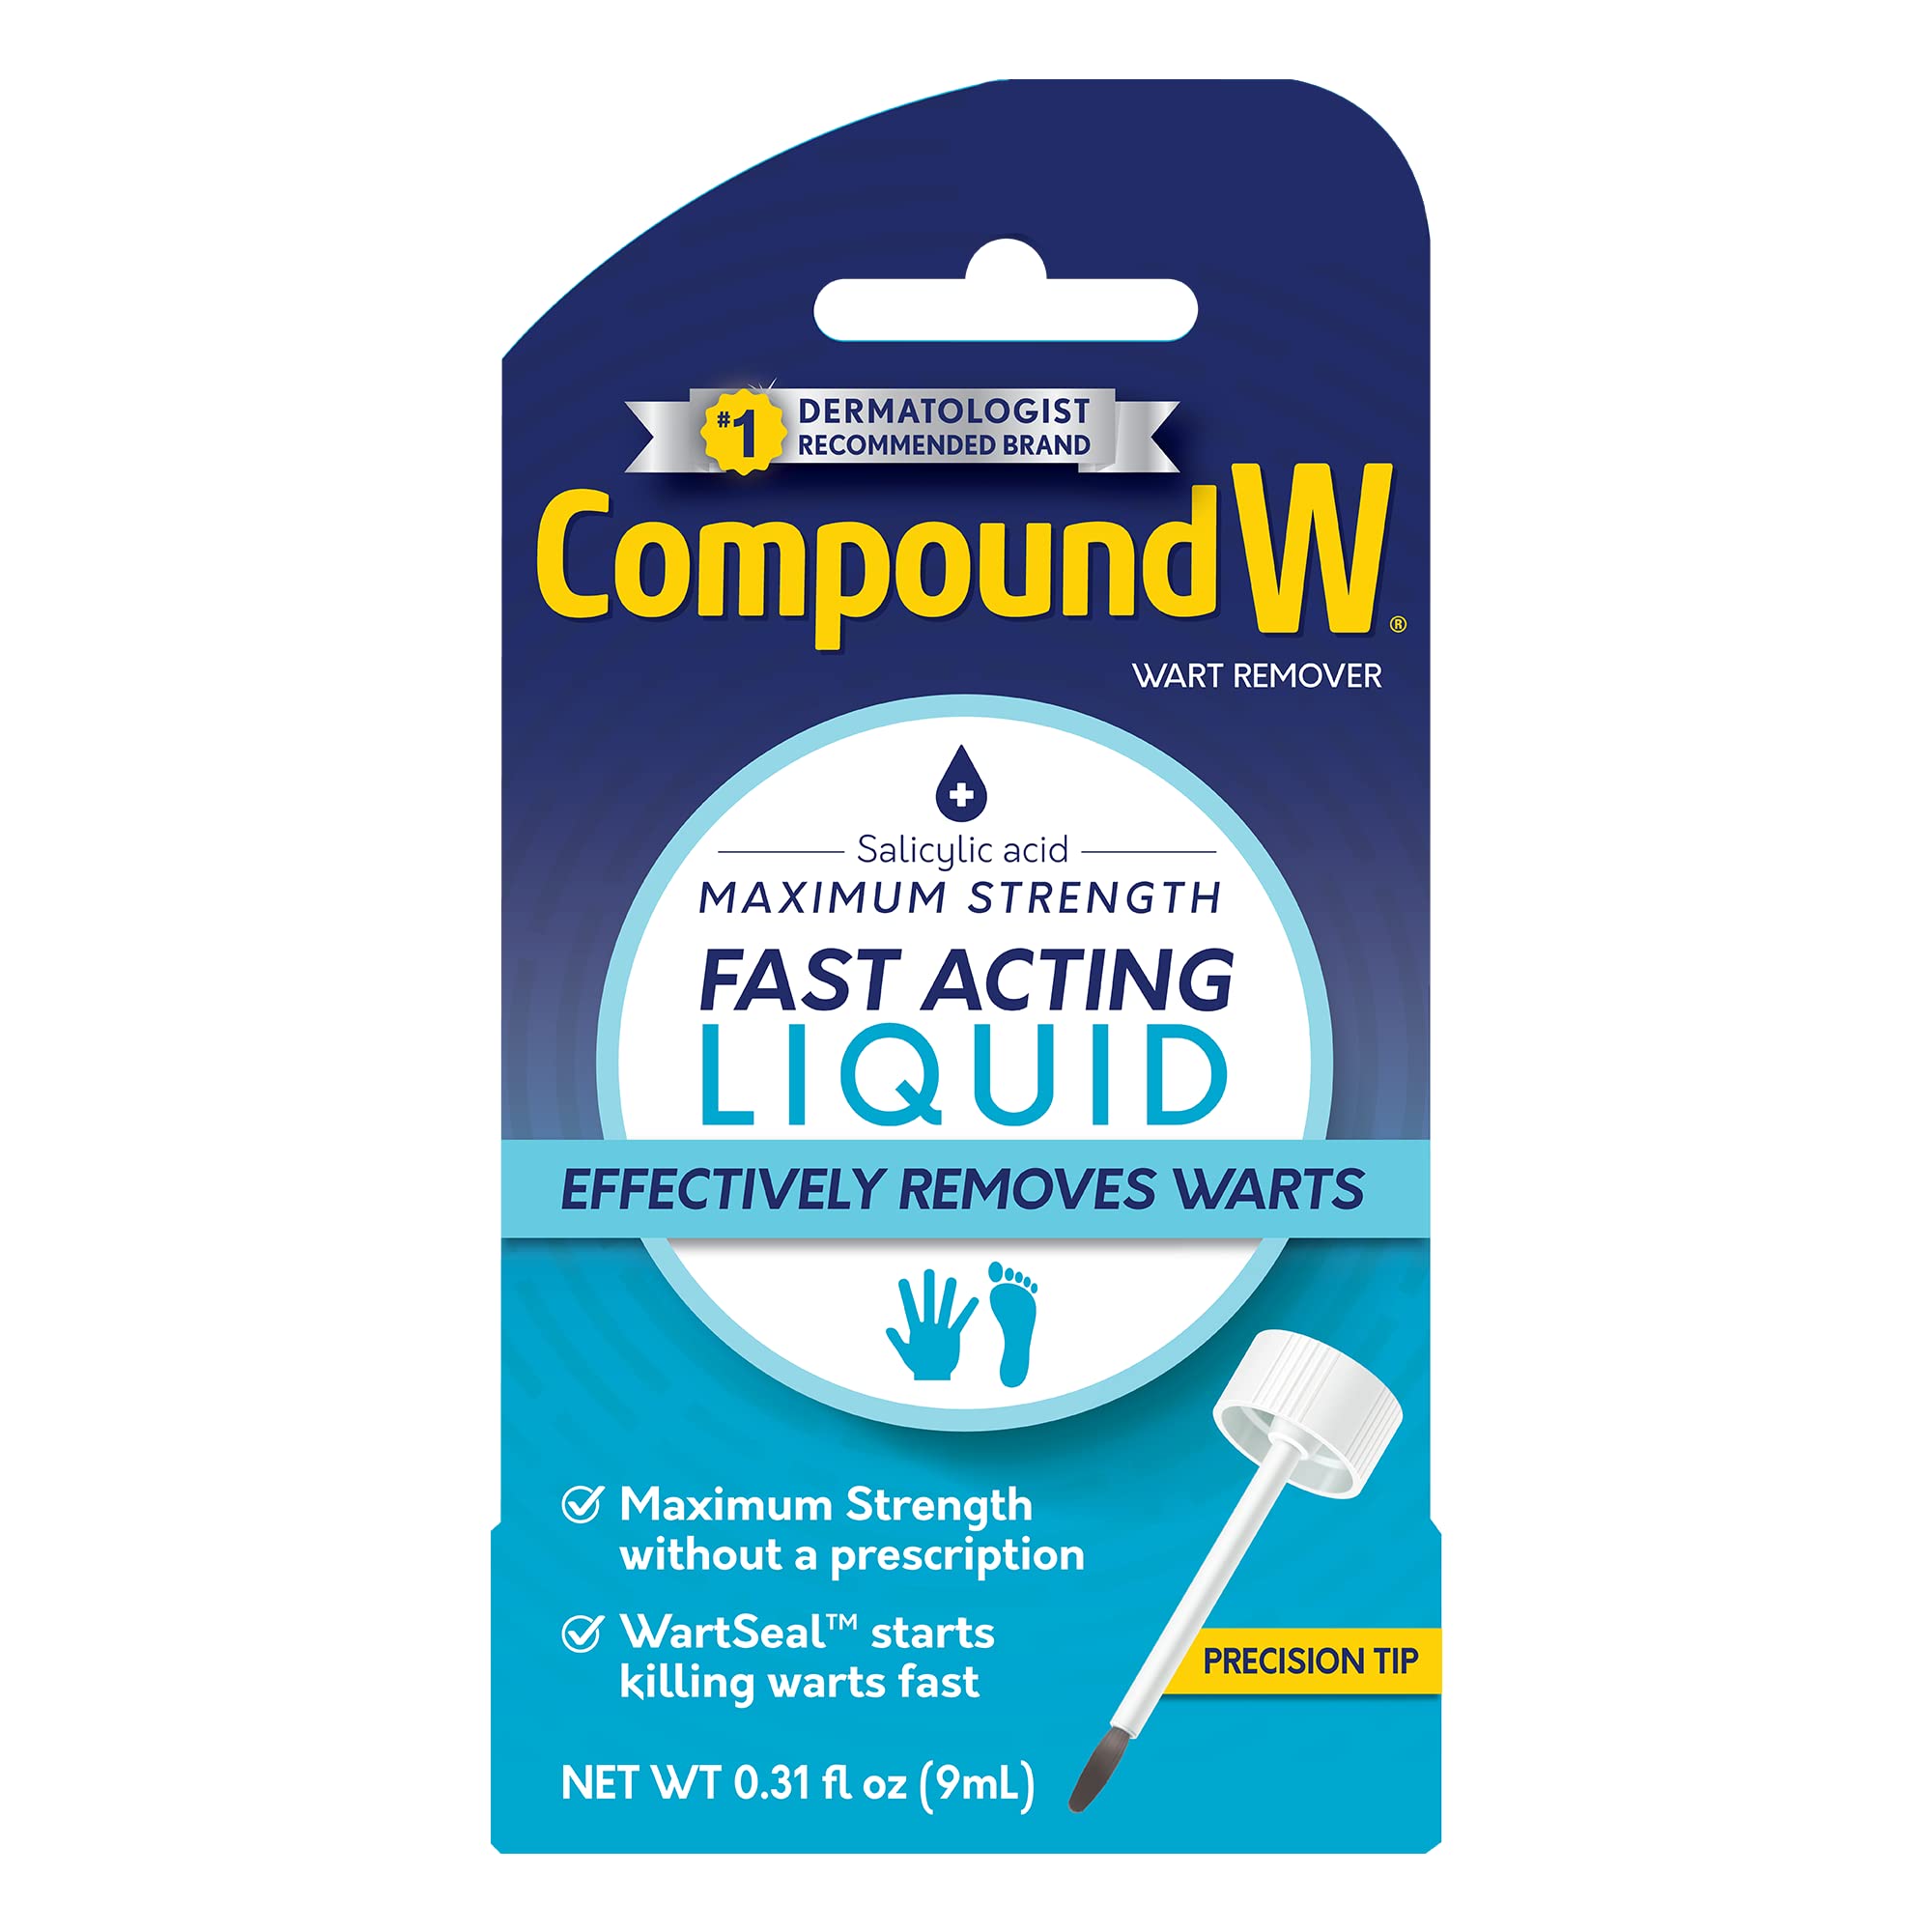 0.31-Oz Compound W Maximum Strength Fast Acting Liquid Wart Remover $2.18